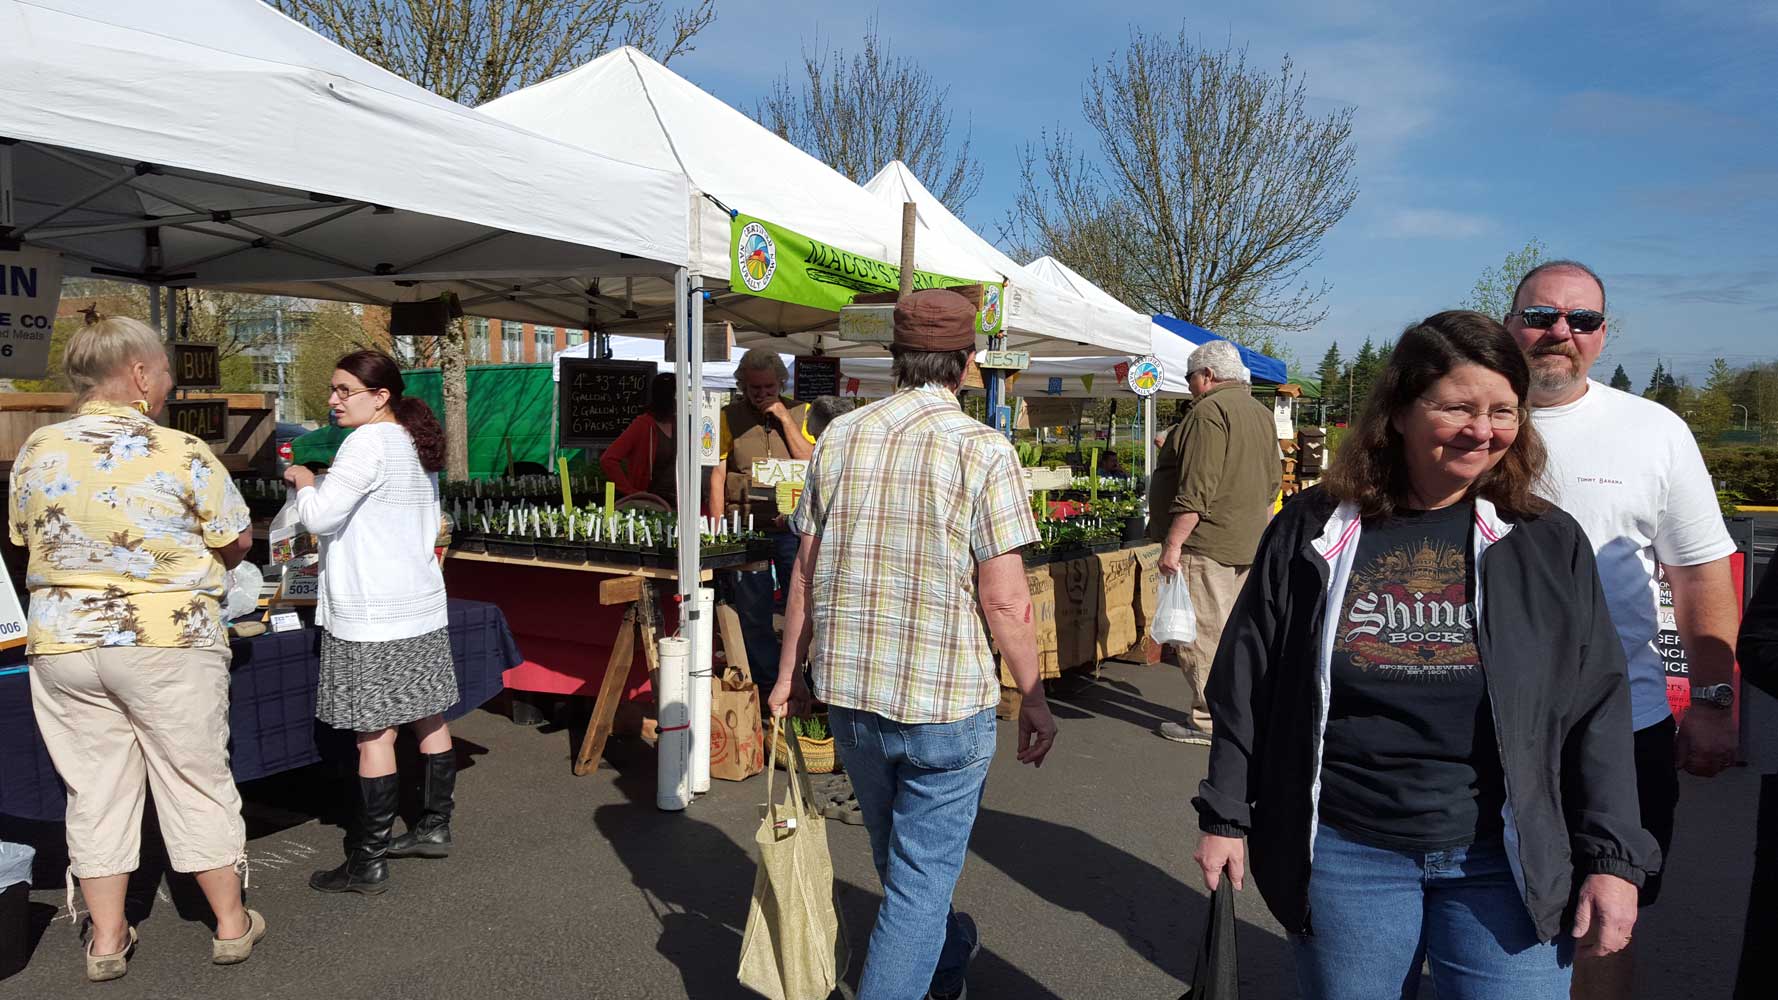 Get out and enjoy the dry market this Saturday!